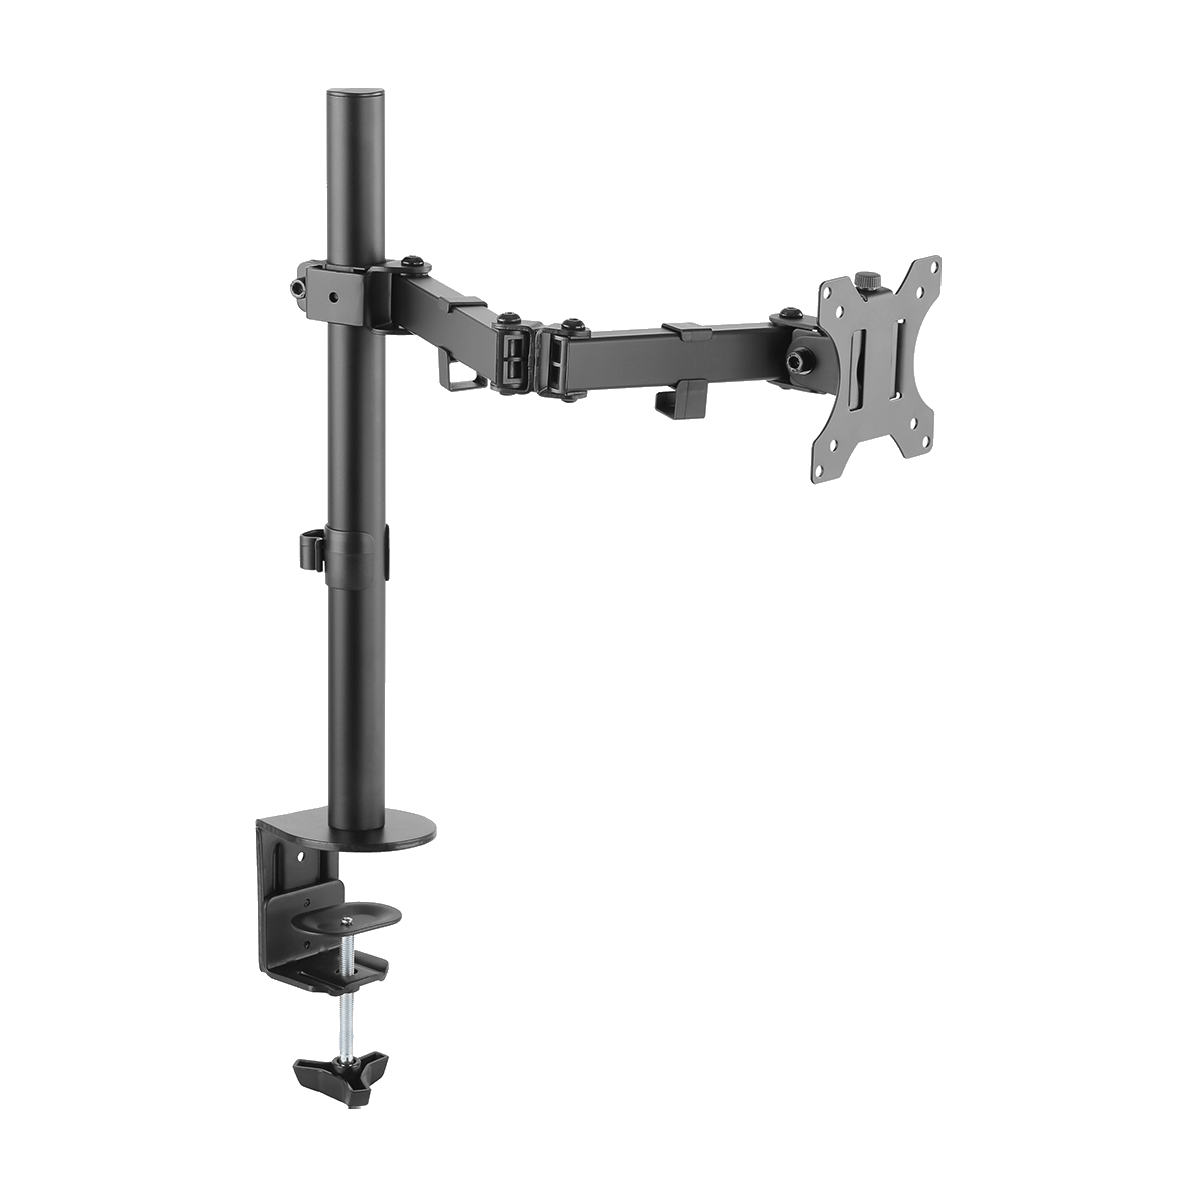 UVI Gas-Spring Monitor VESA Monitor Mount - Ideal for monitors up to 32